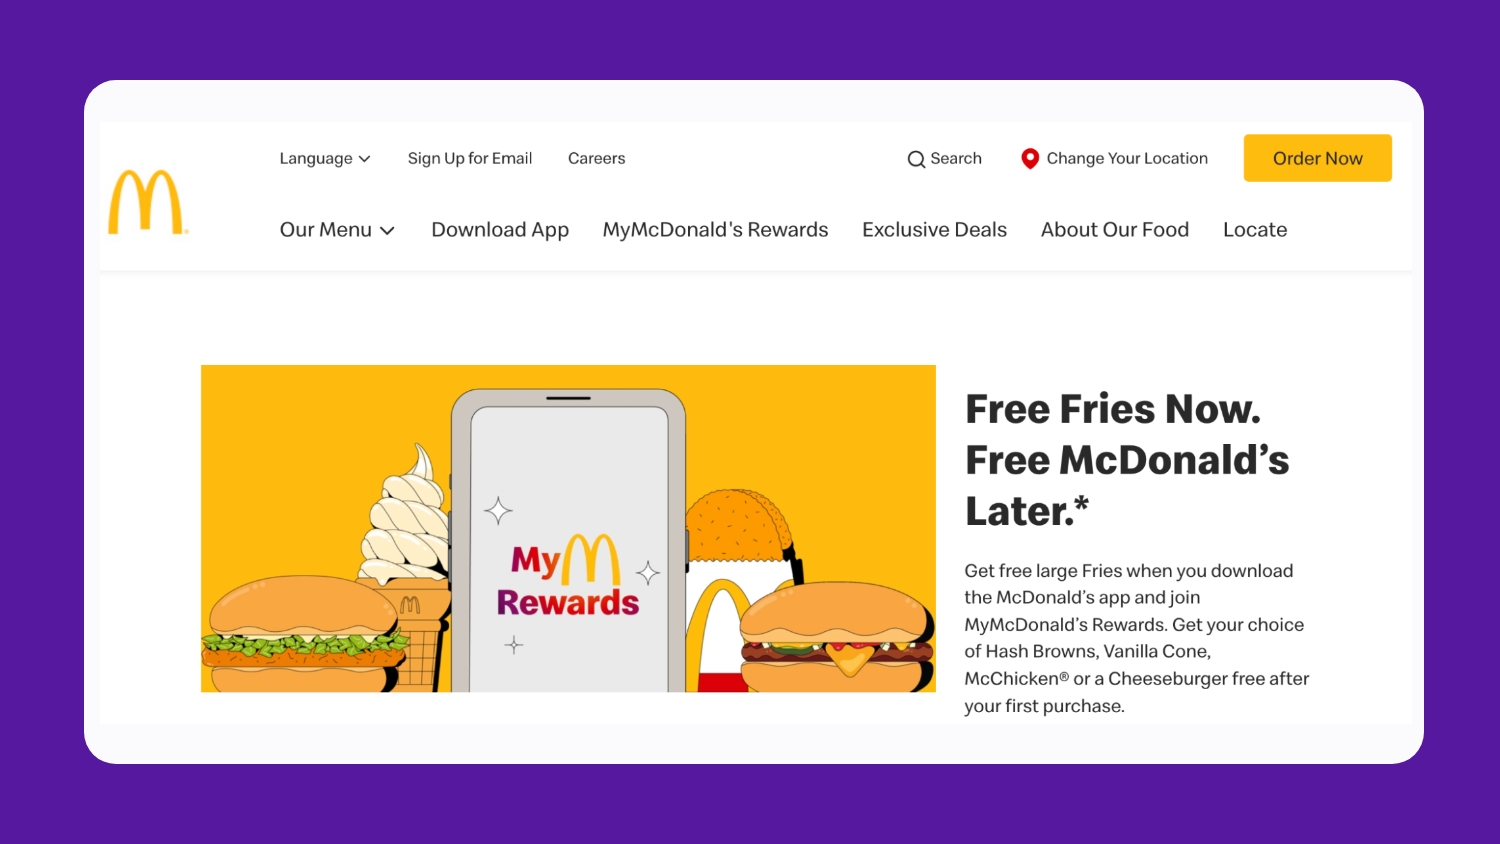 McDonald's Website for the US